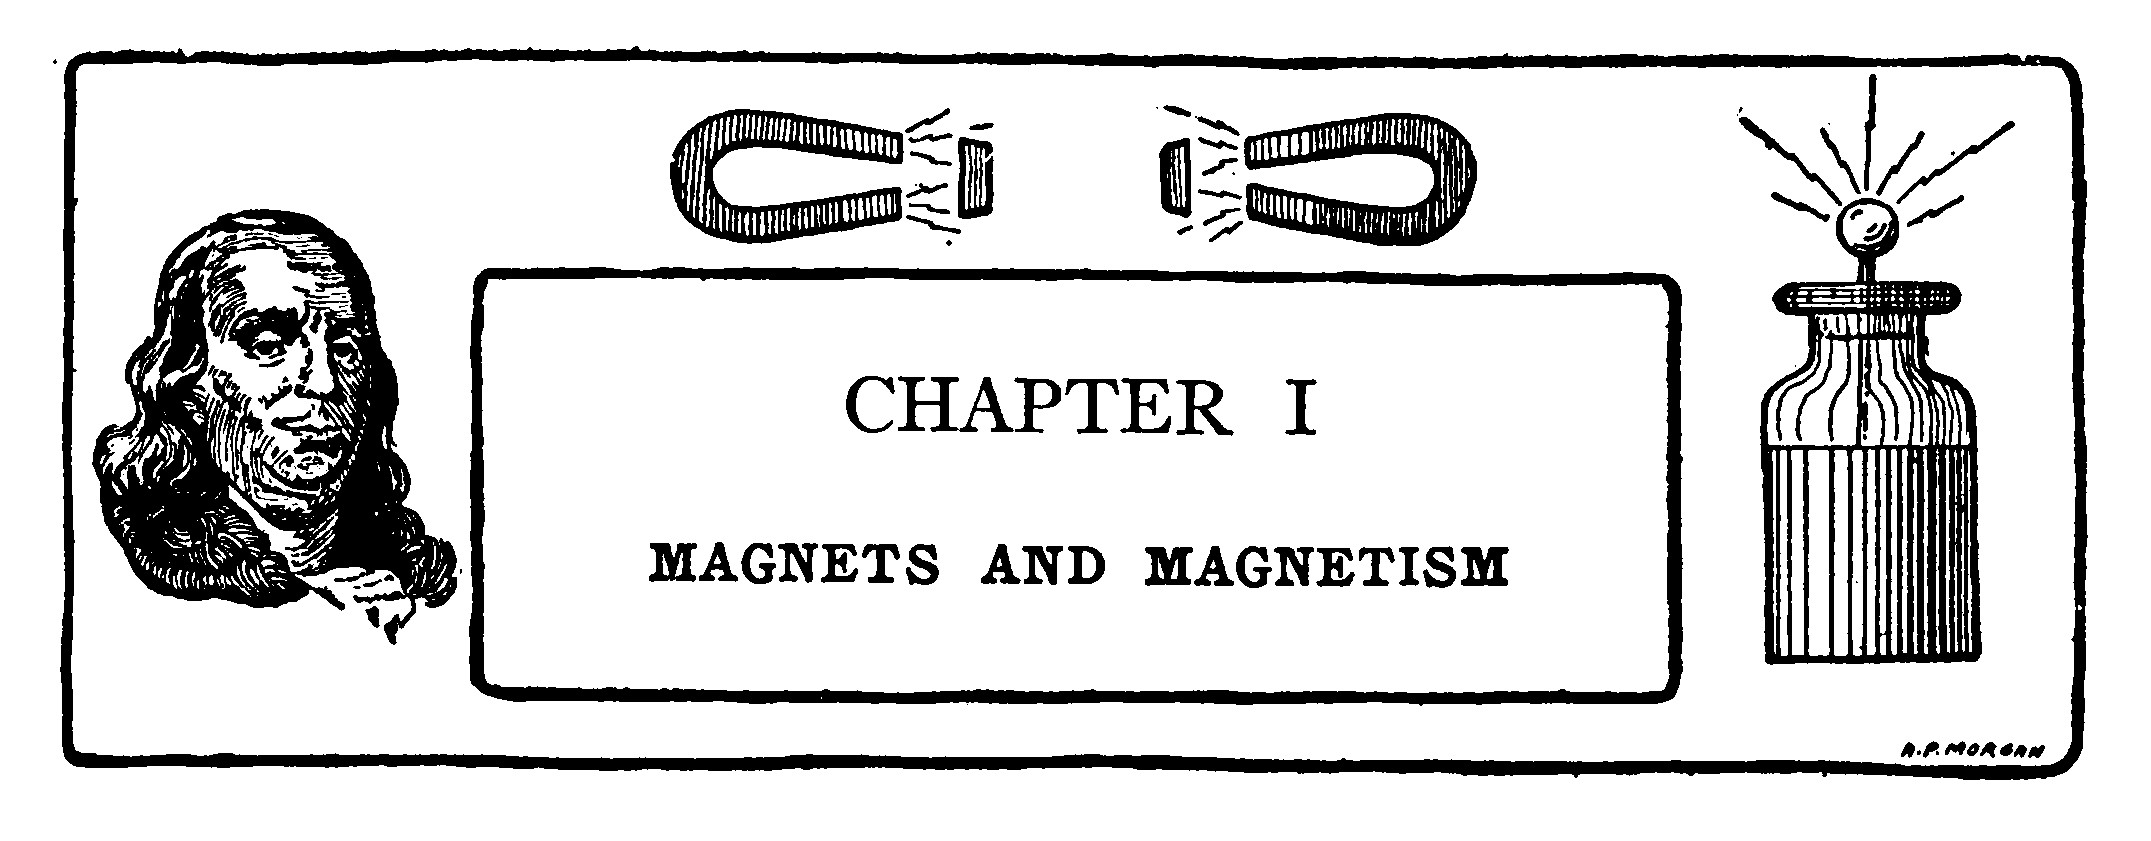 MAGNETS AND MAGNETISM